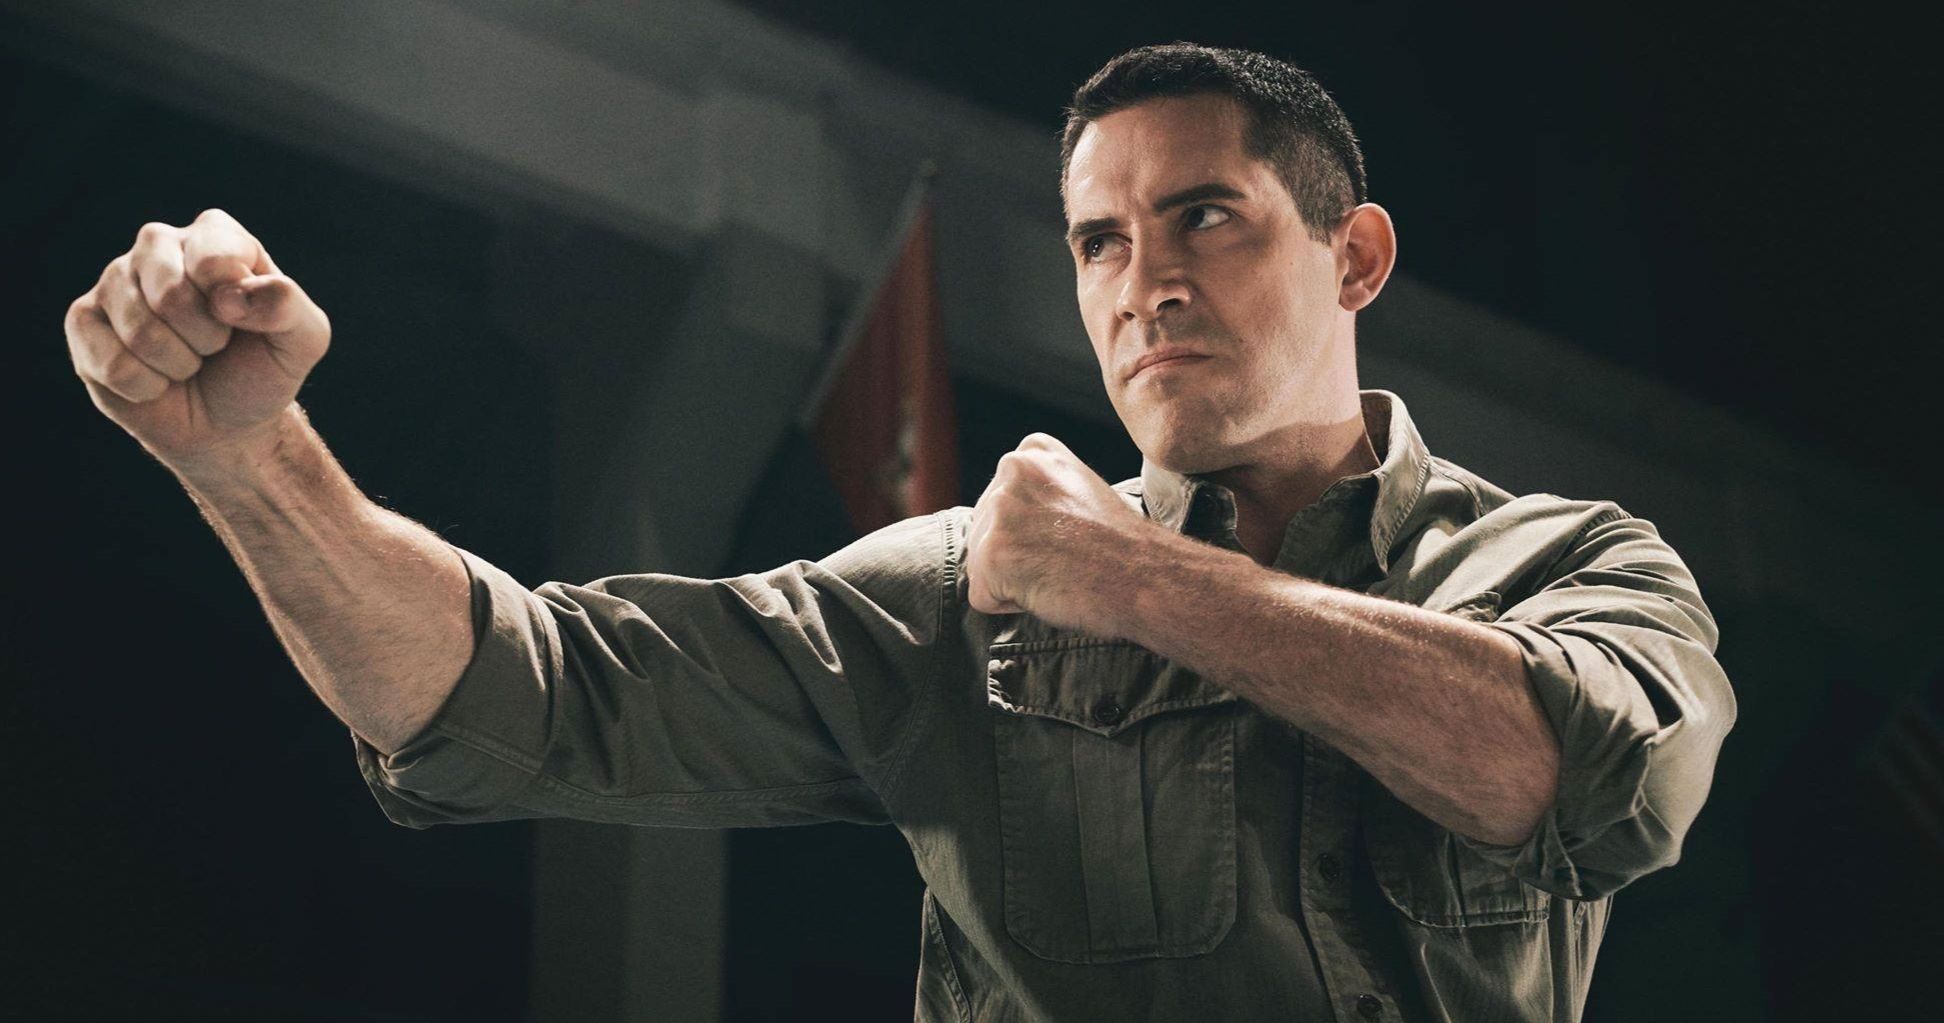 Scott Adkins Thinks Starring in a New Road House Movie Is the Greatest Idea He's Ever Heard